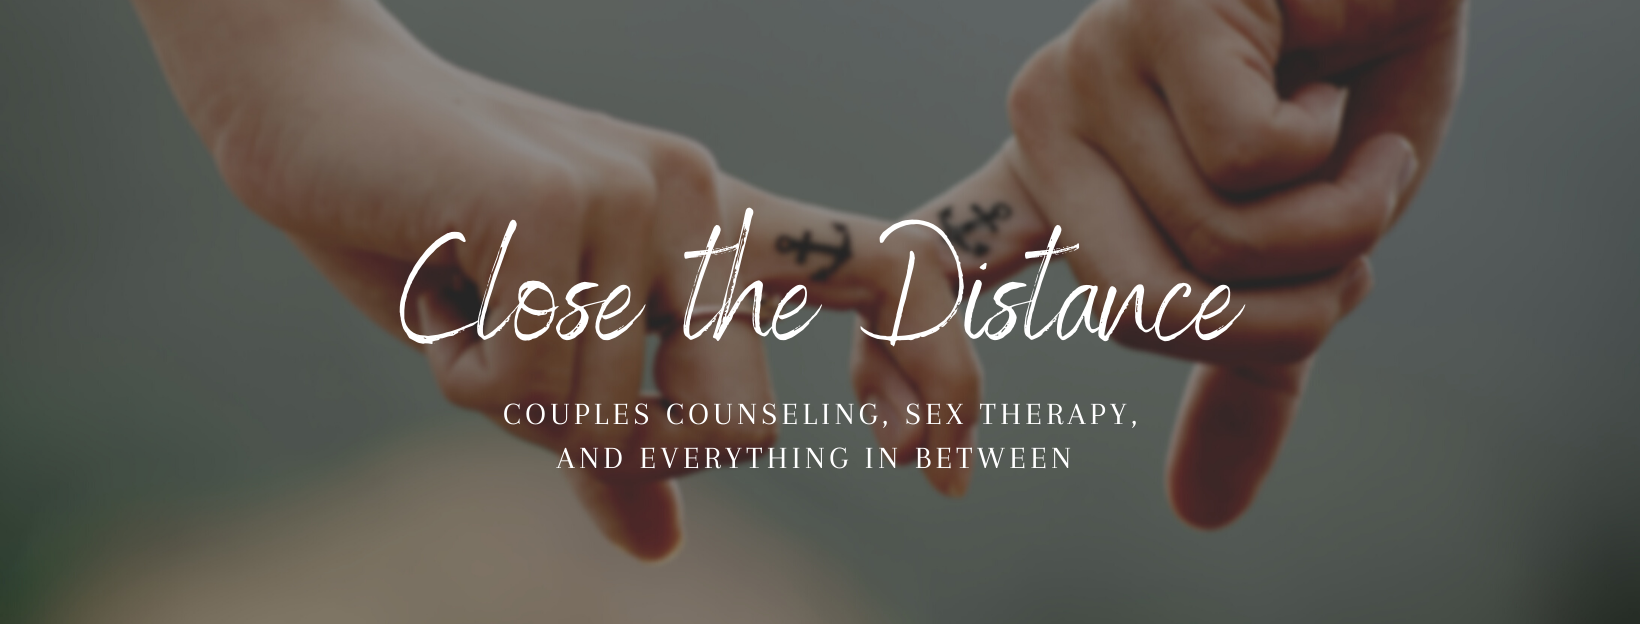 Denver Marriage and Couples Counseling